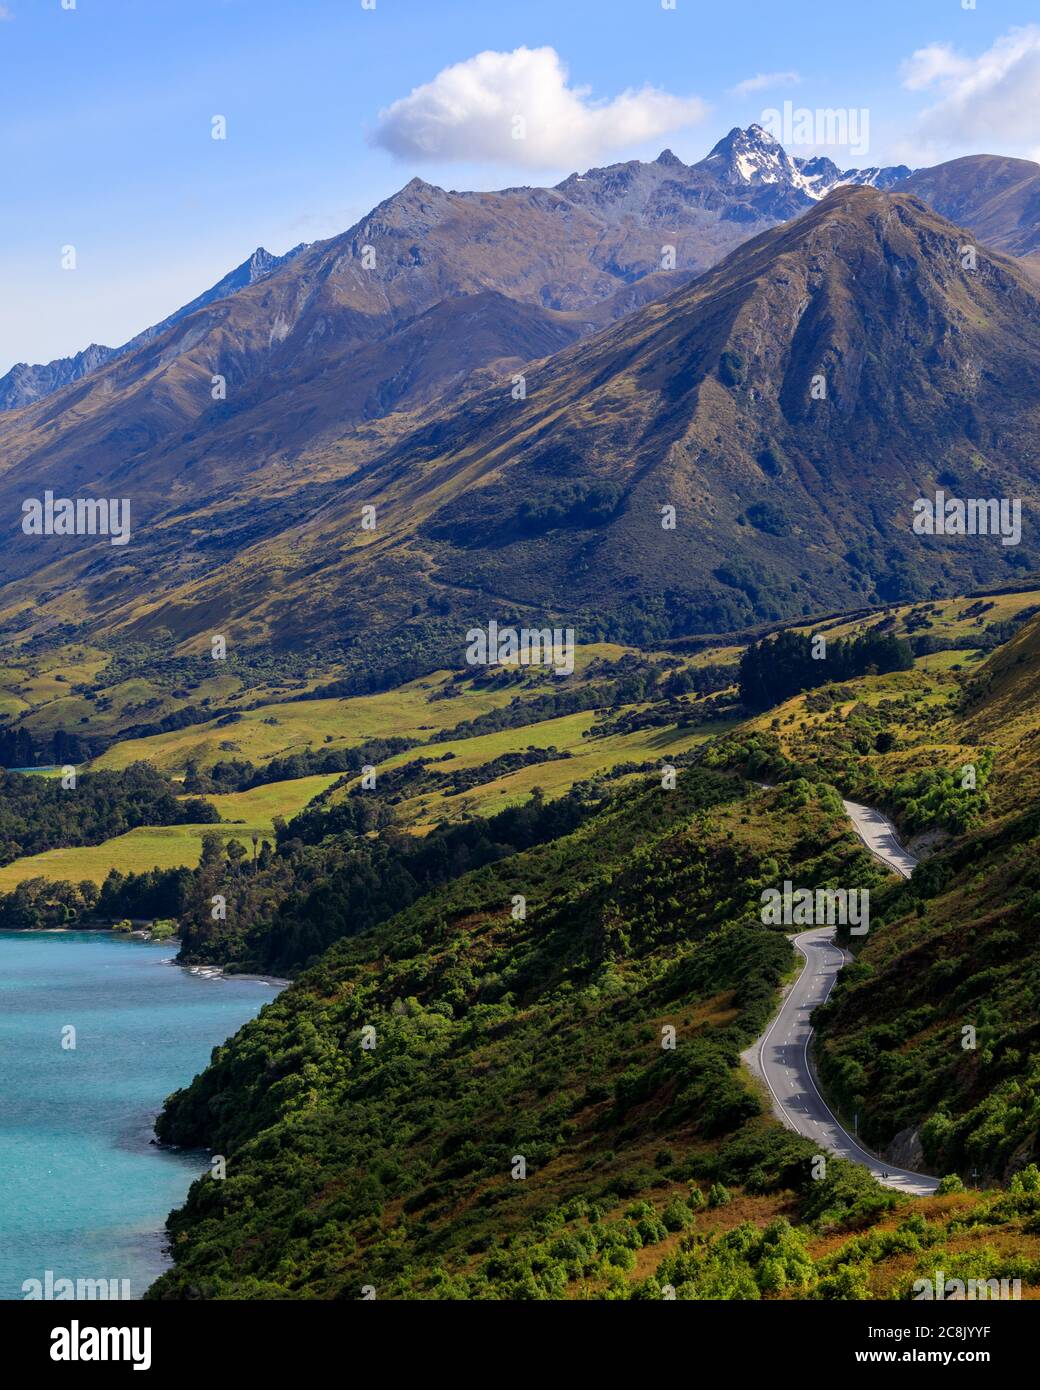 The road between Glenorchy and Queenstown next to Lake Wakatipu. From the view of Bennetts Bluff Lookout towards the mountains. Stock Photo